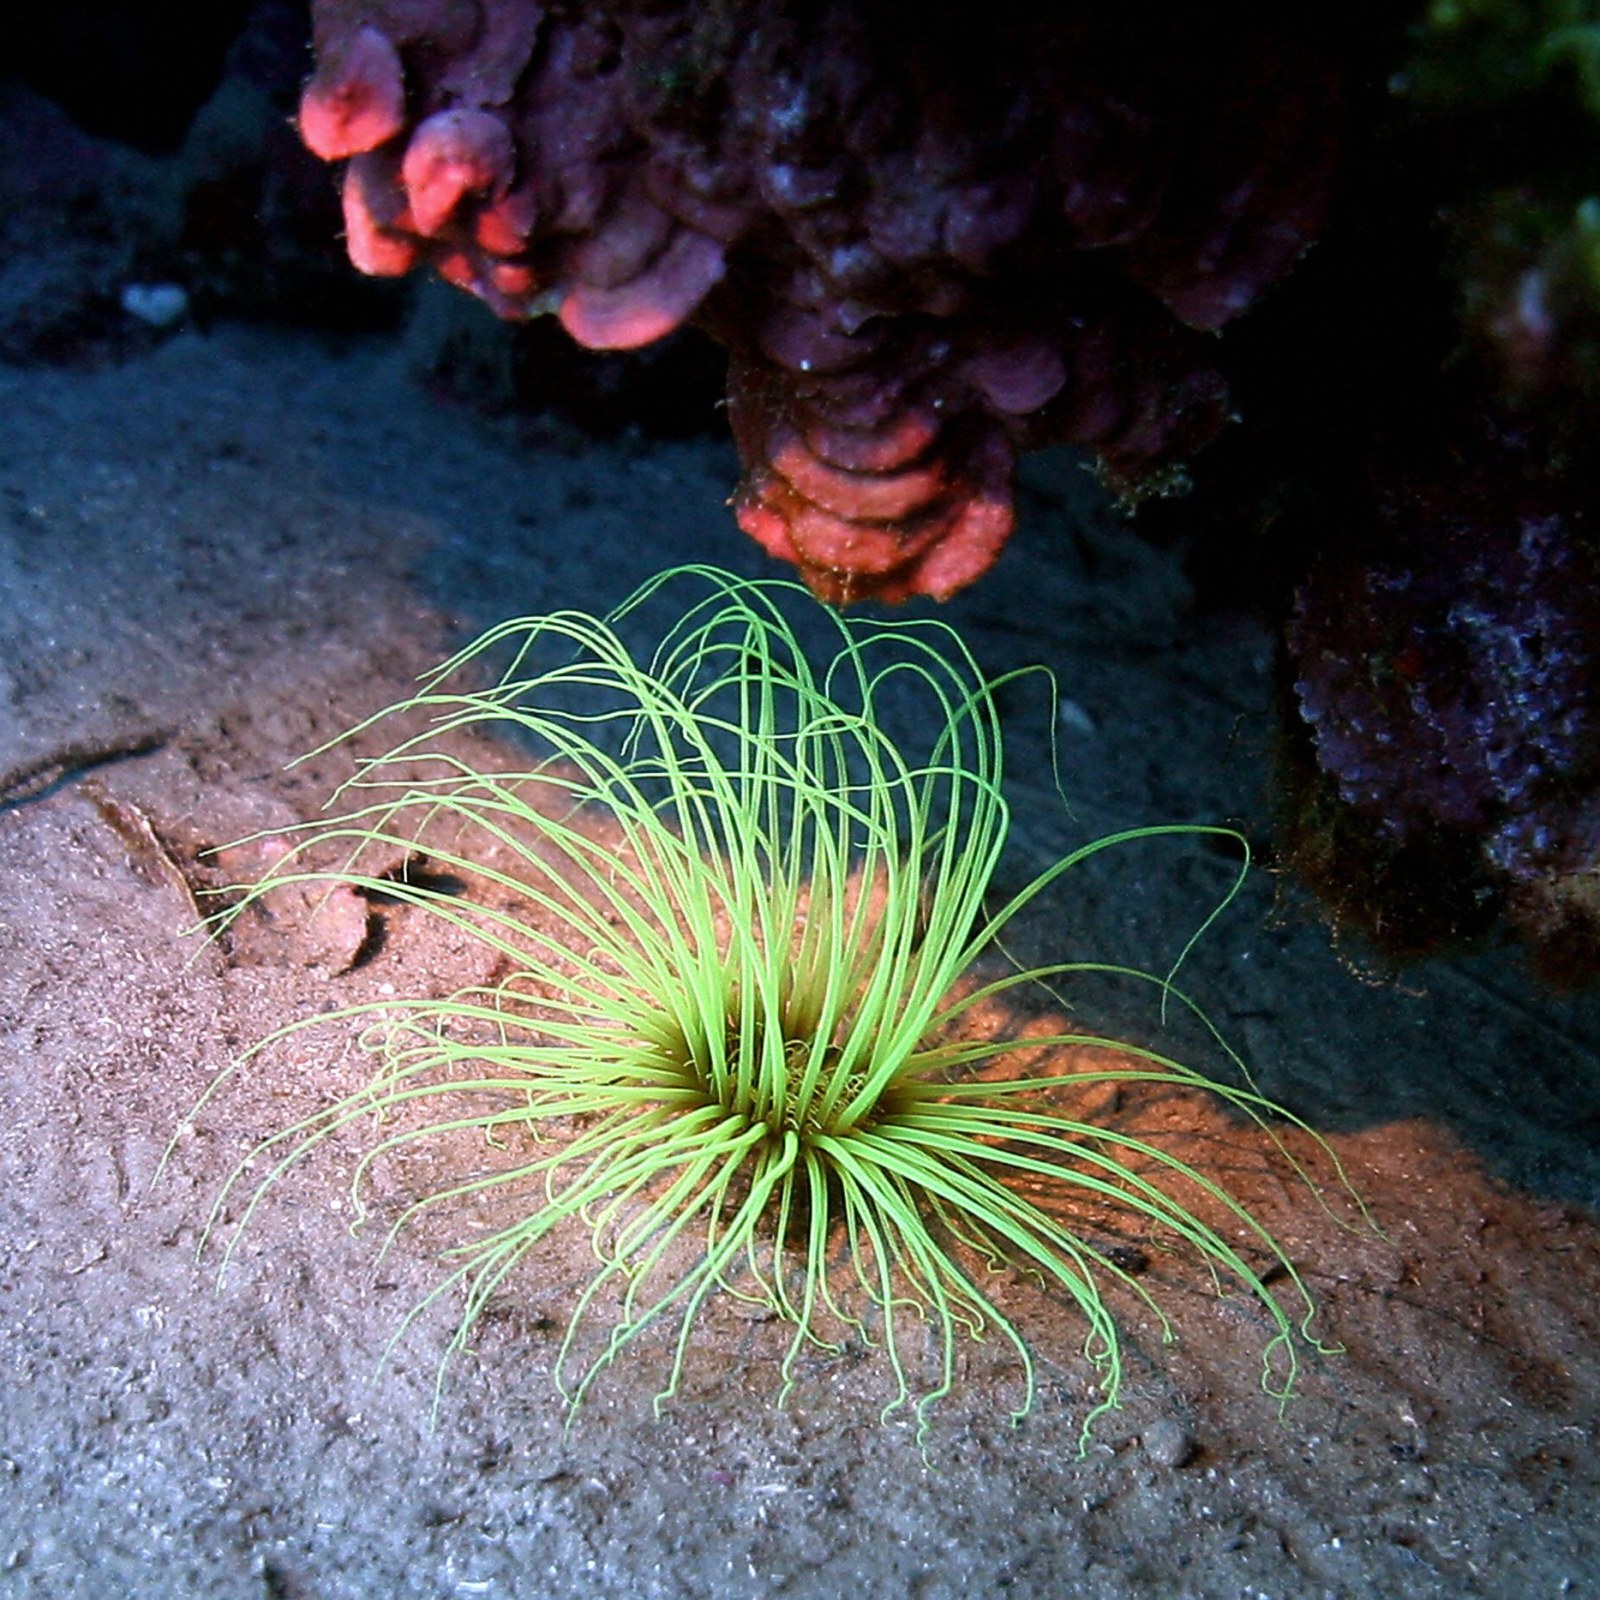 Plants or Animals? These Organisms Defy Categories